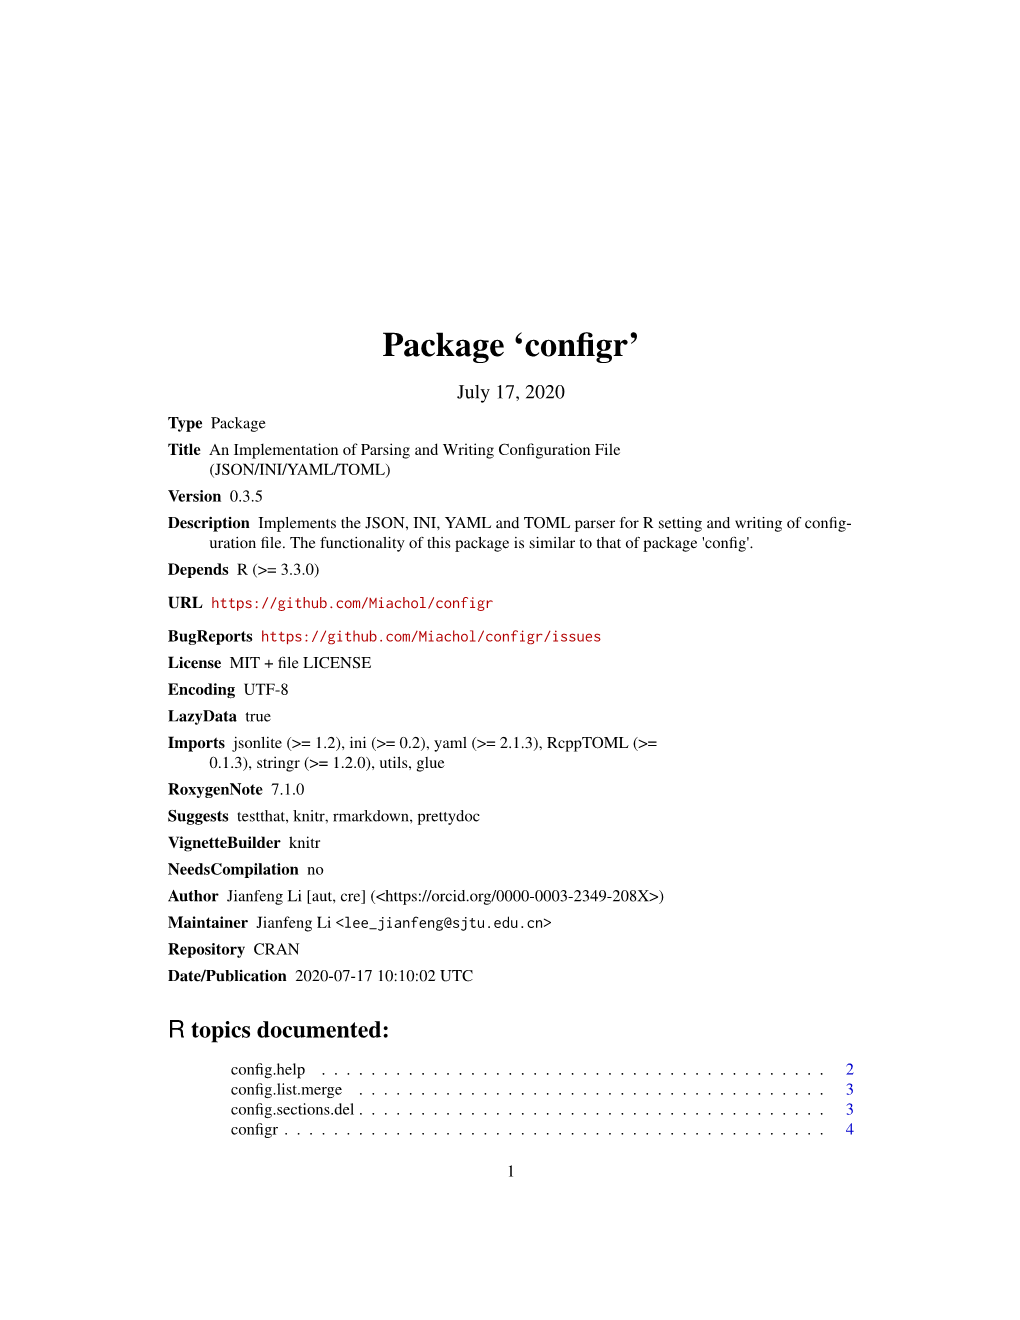 Package 'Configr'